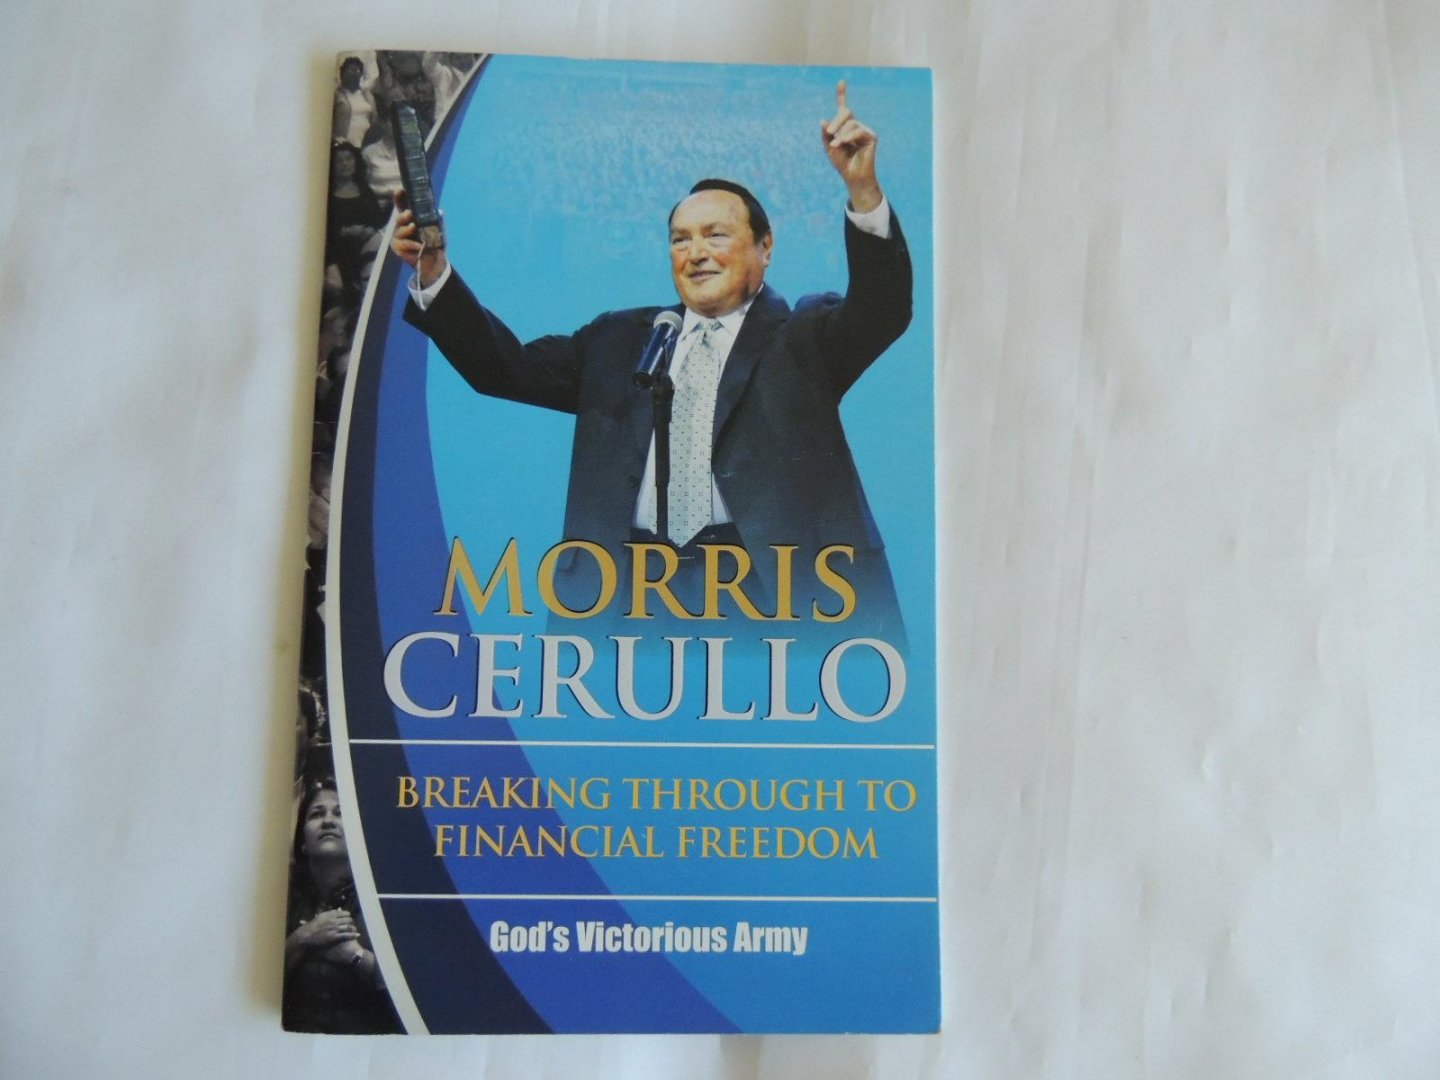 Cerullo morris - Breaking through to financial freedom - God's victorious army